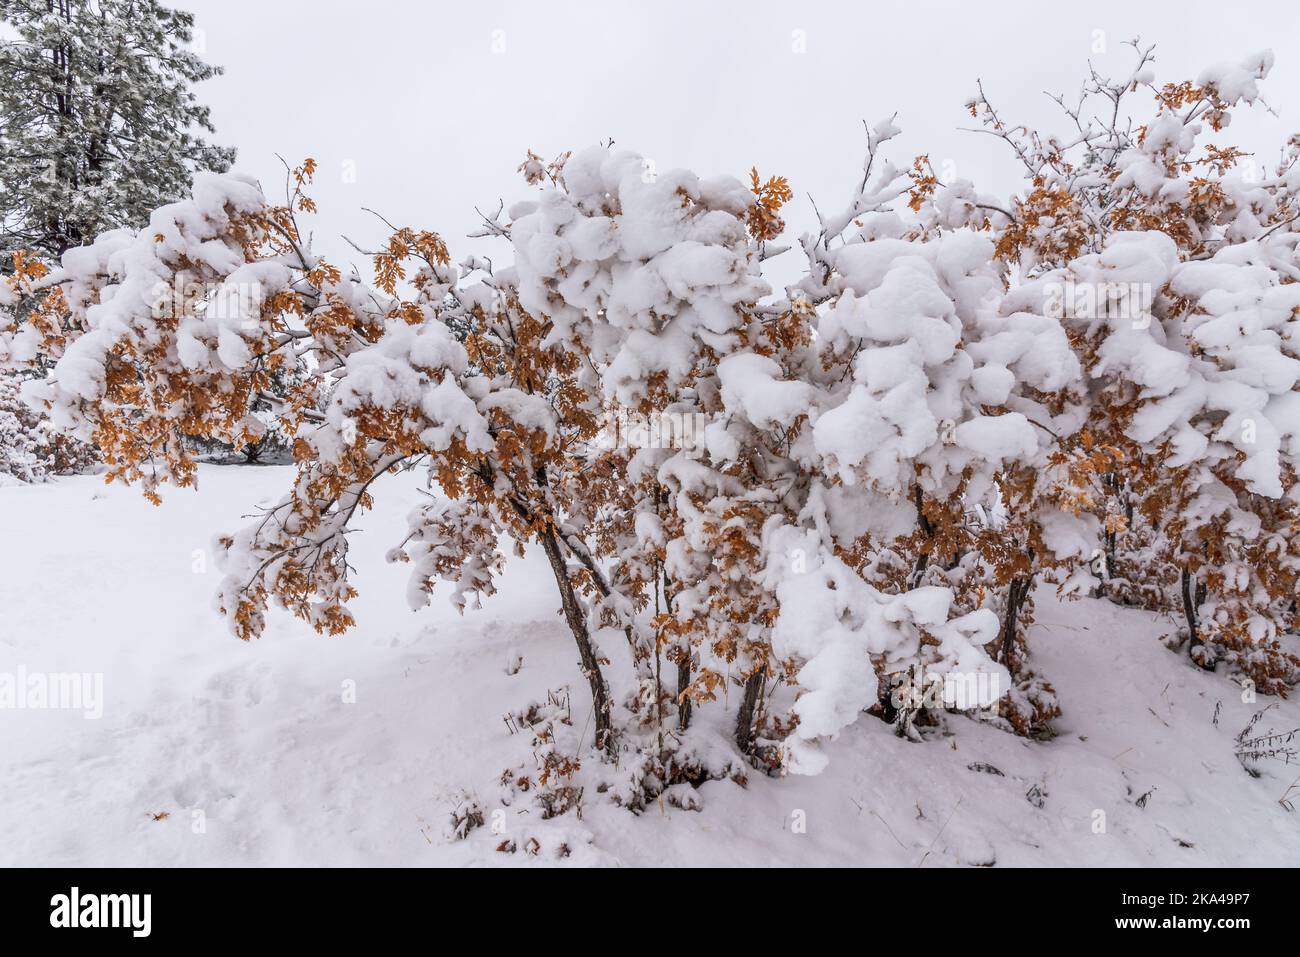 Heavy snow bend the branches of young scrub oak trees. Stock Photo